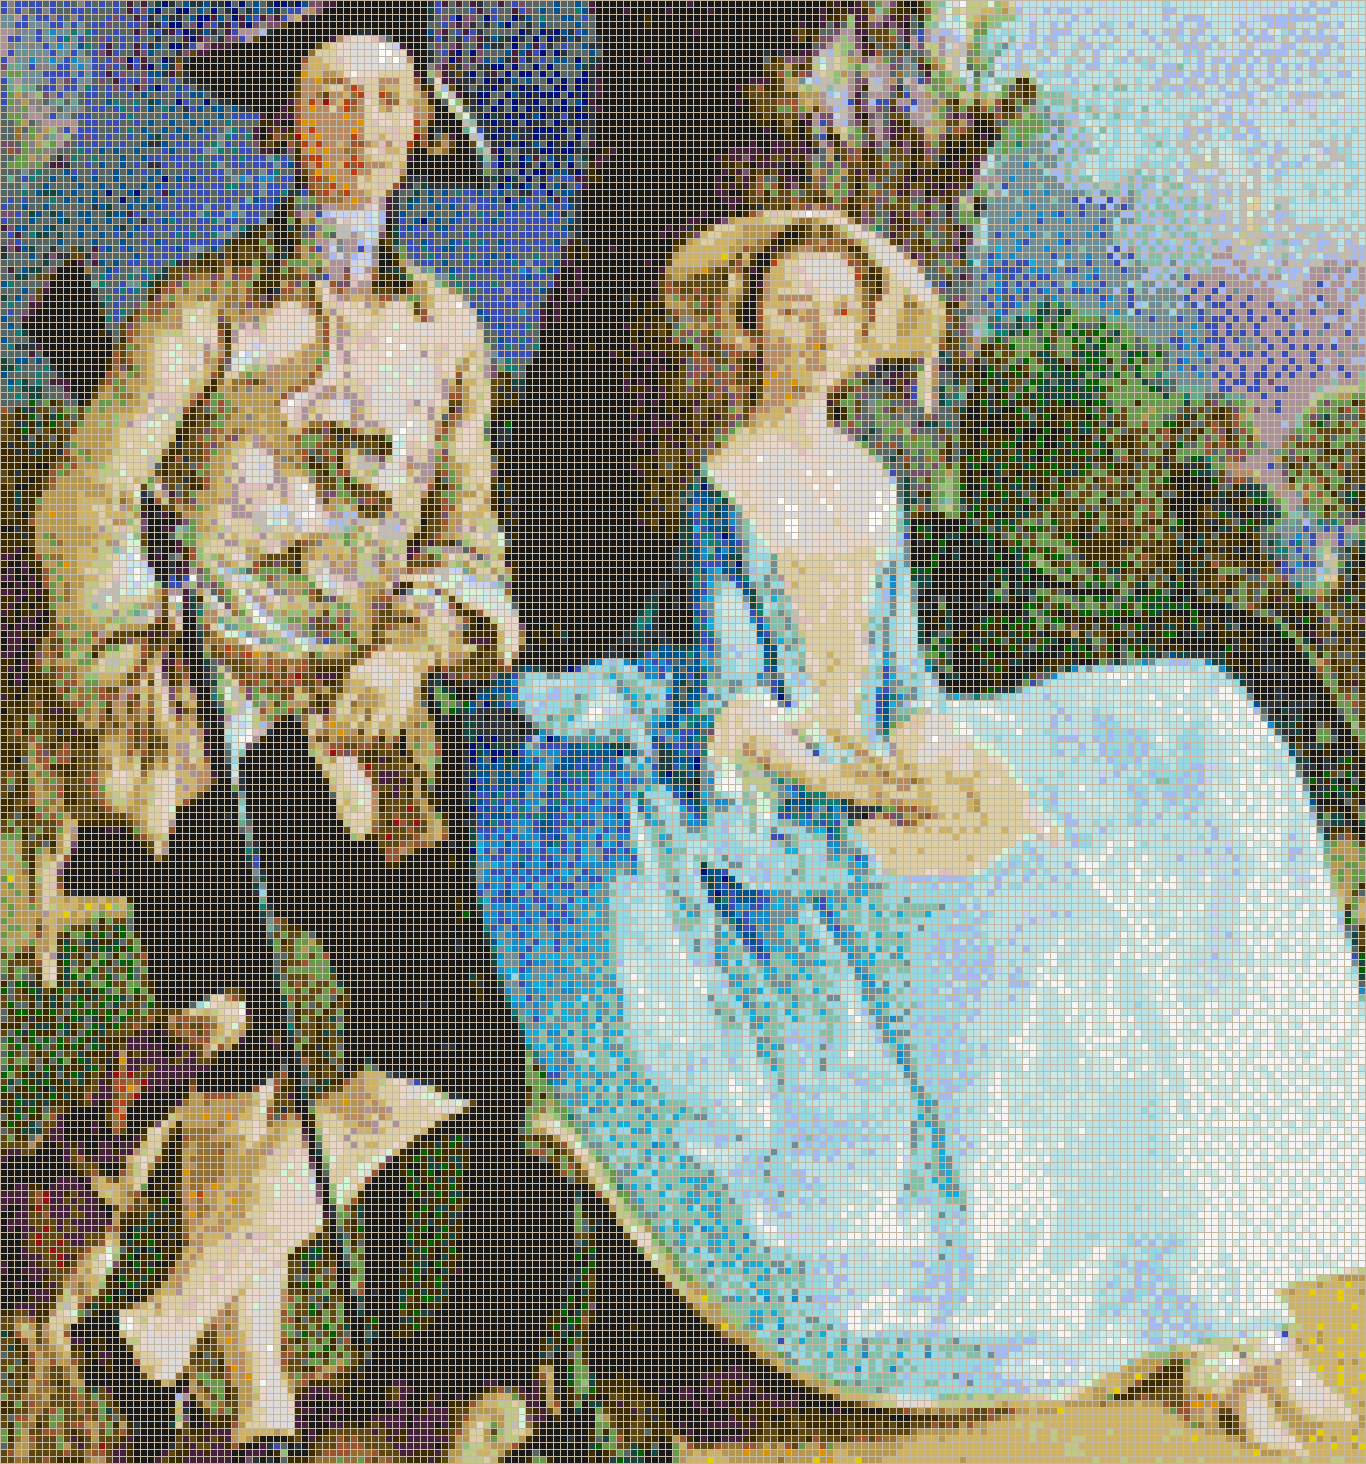 Mr and Mrs Andrews (Gainsborough) - Mosaic Tile Picture Art